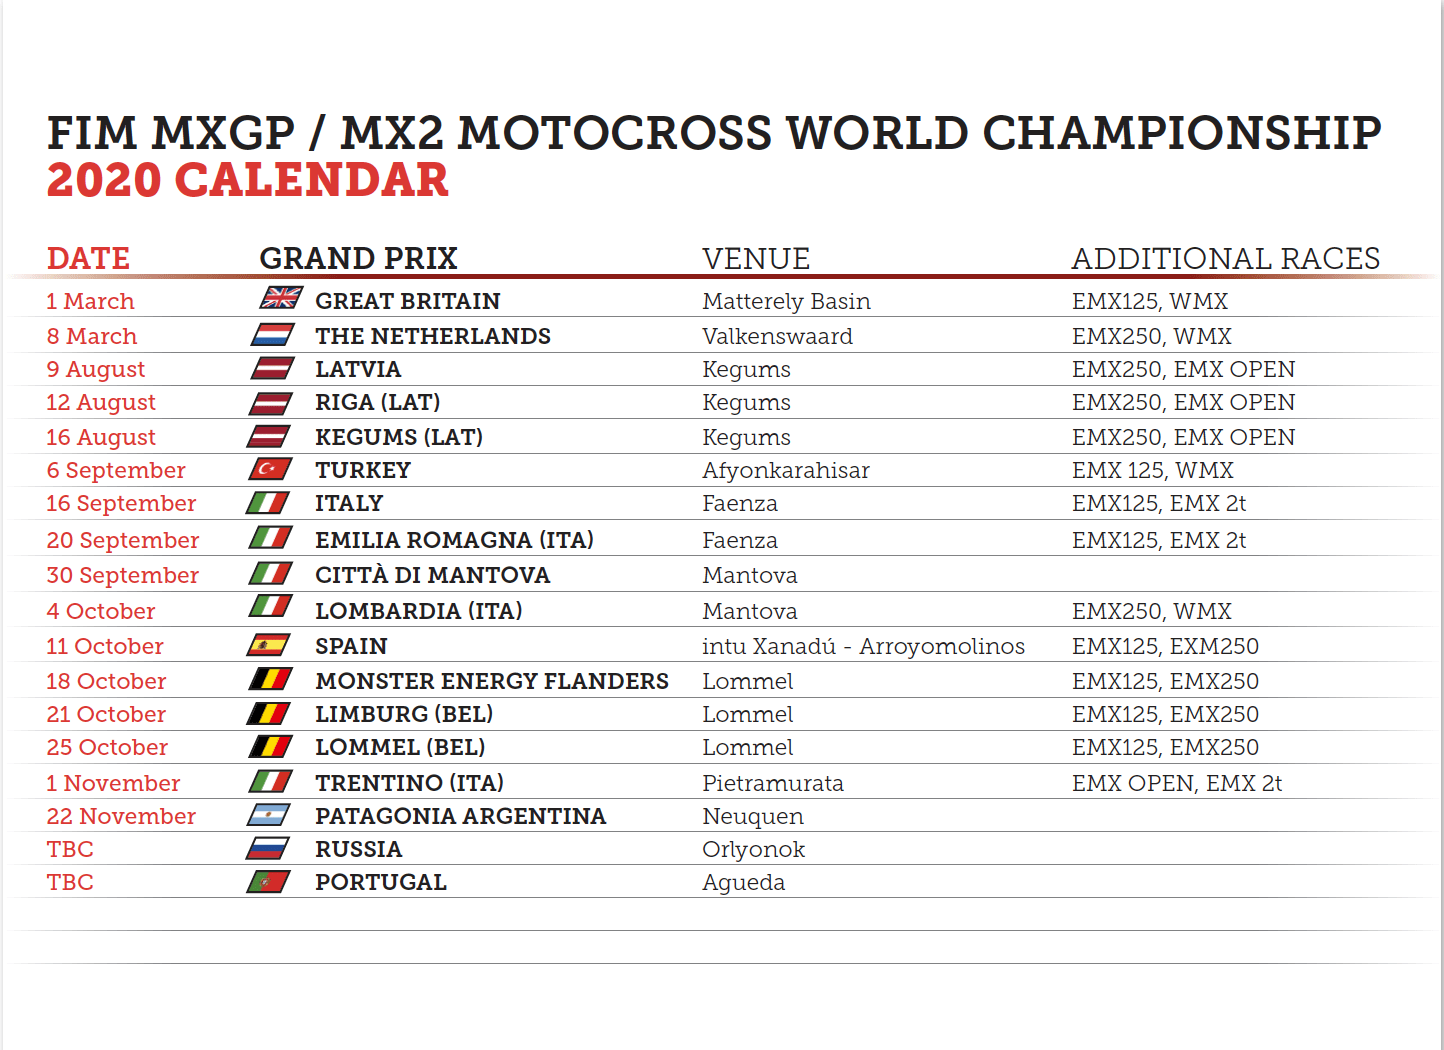 2020 MXGP Calendar Update and 2020 Motocross of Nations Cancelled - Motorcycle News from SBN